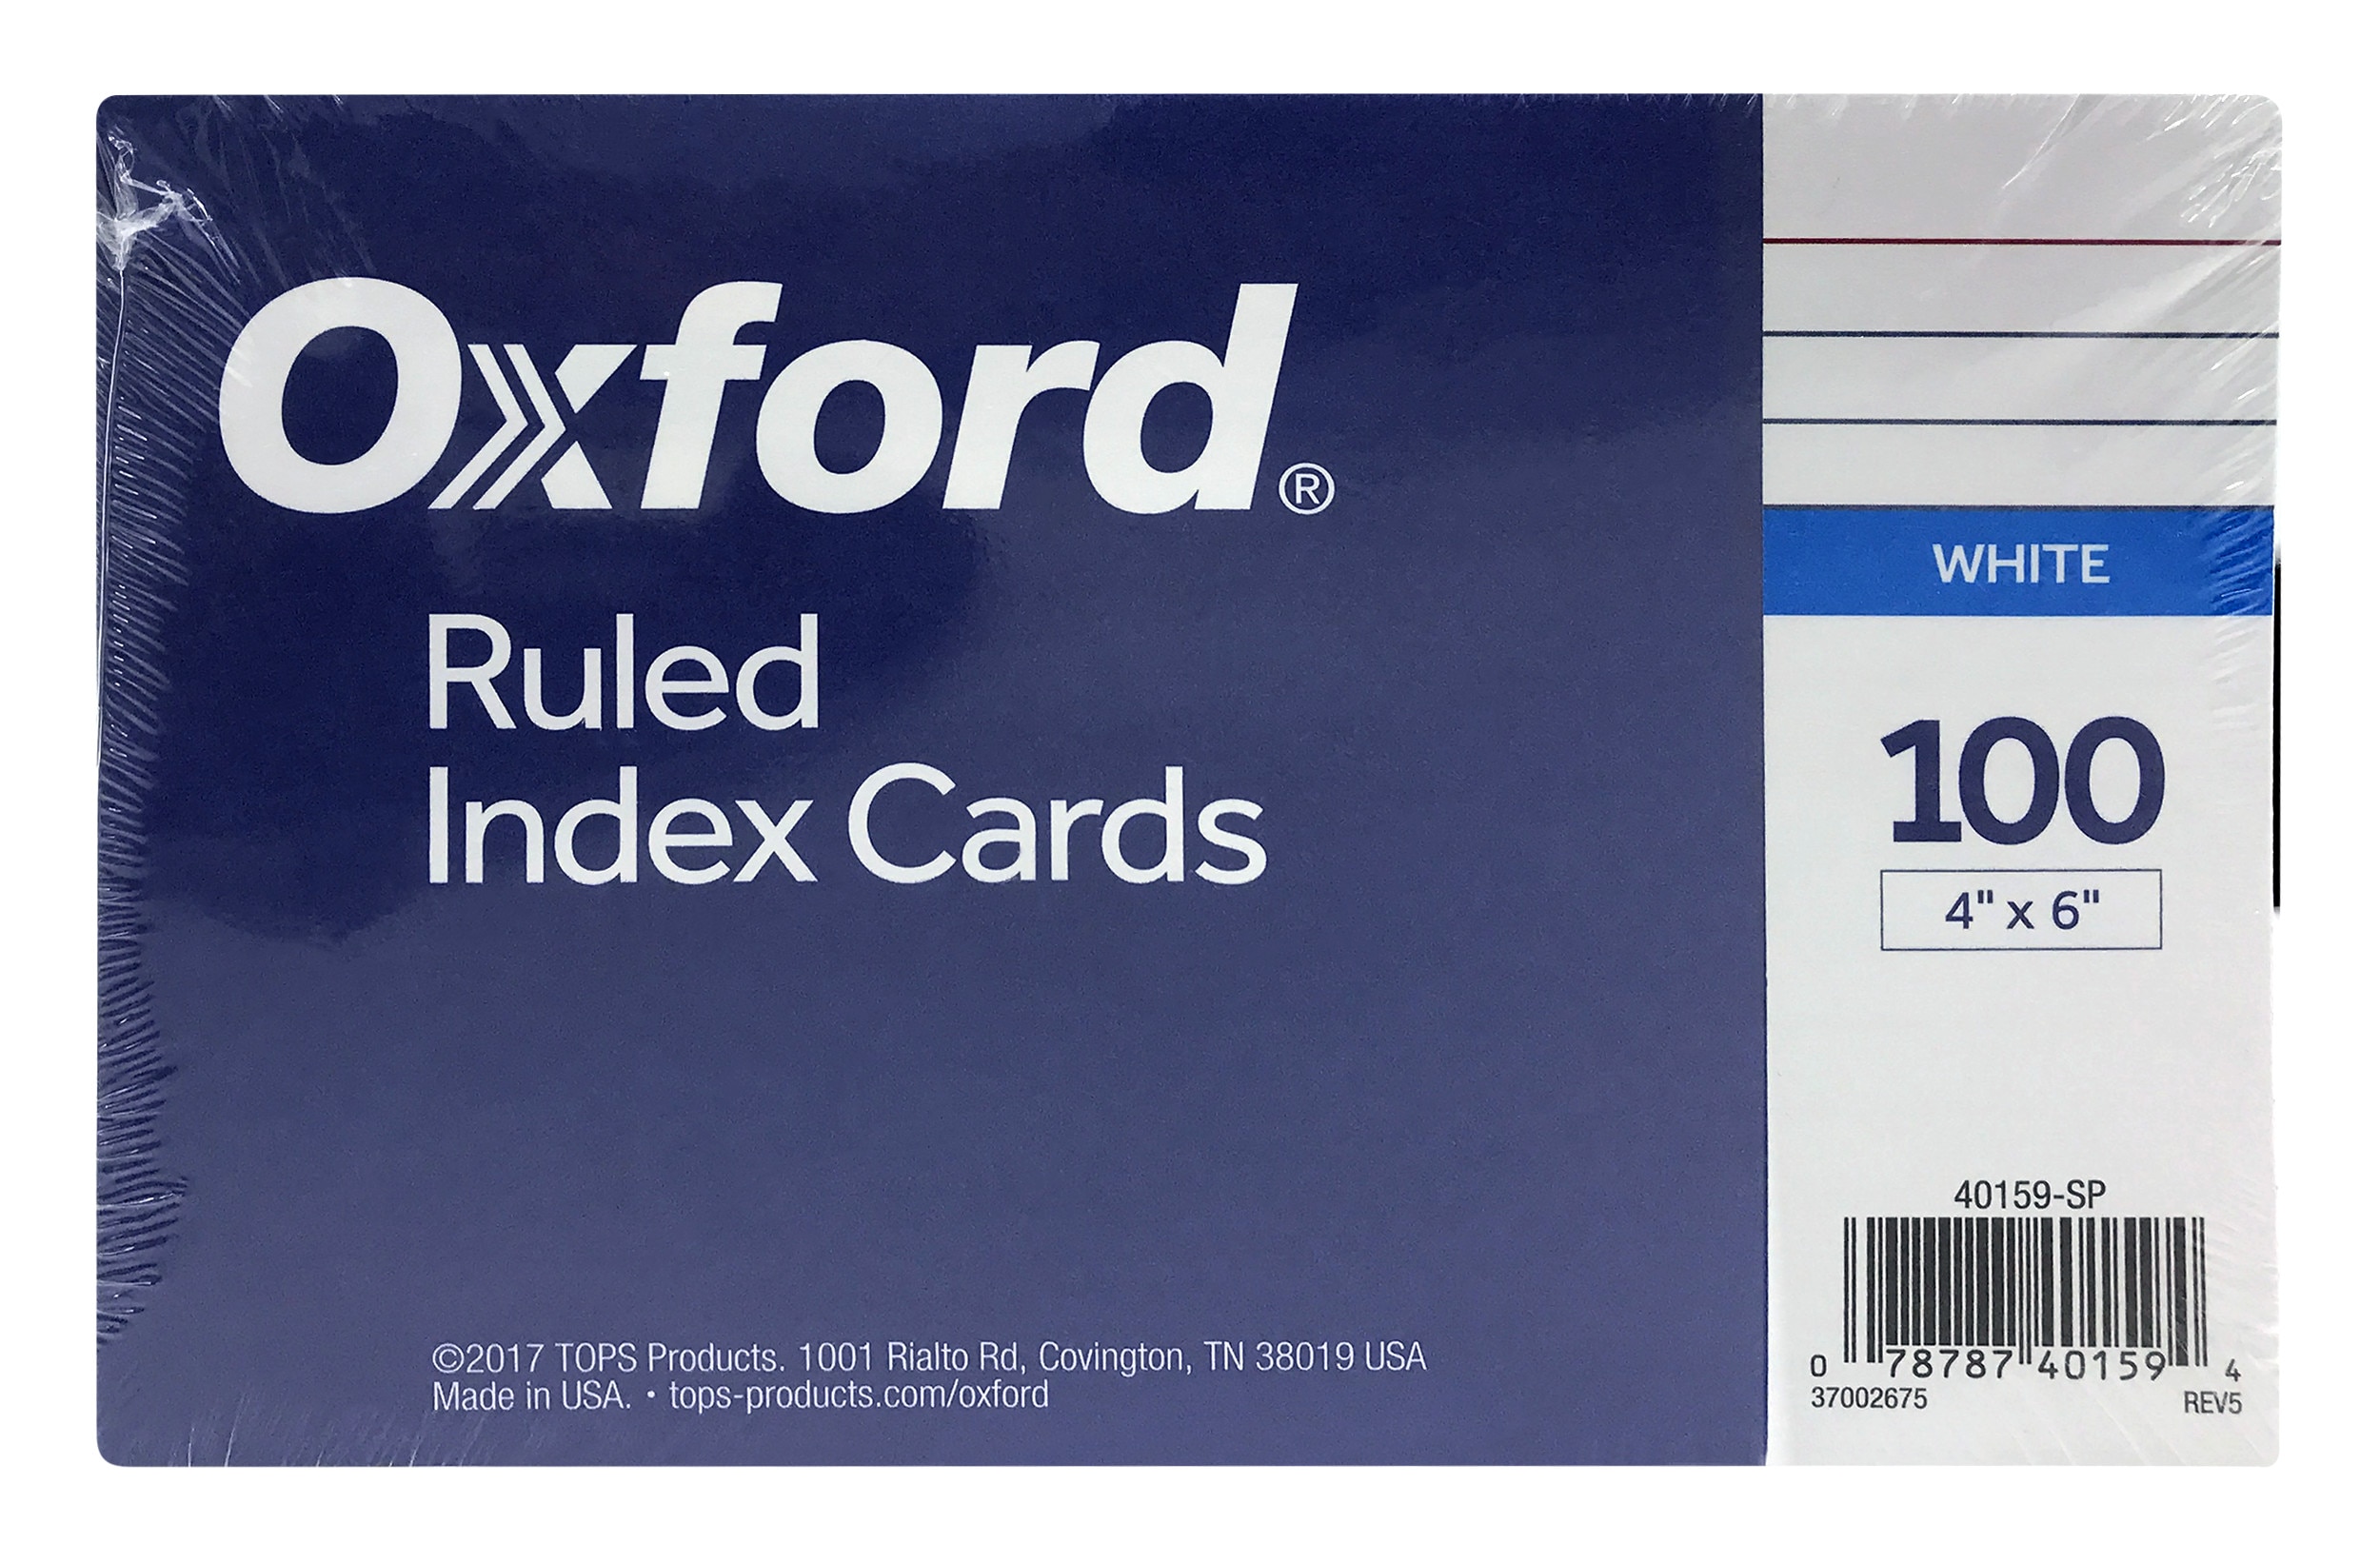 Oxford 4 inch x 6 inch Ruled White Index Cards